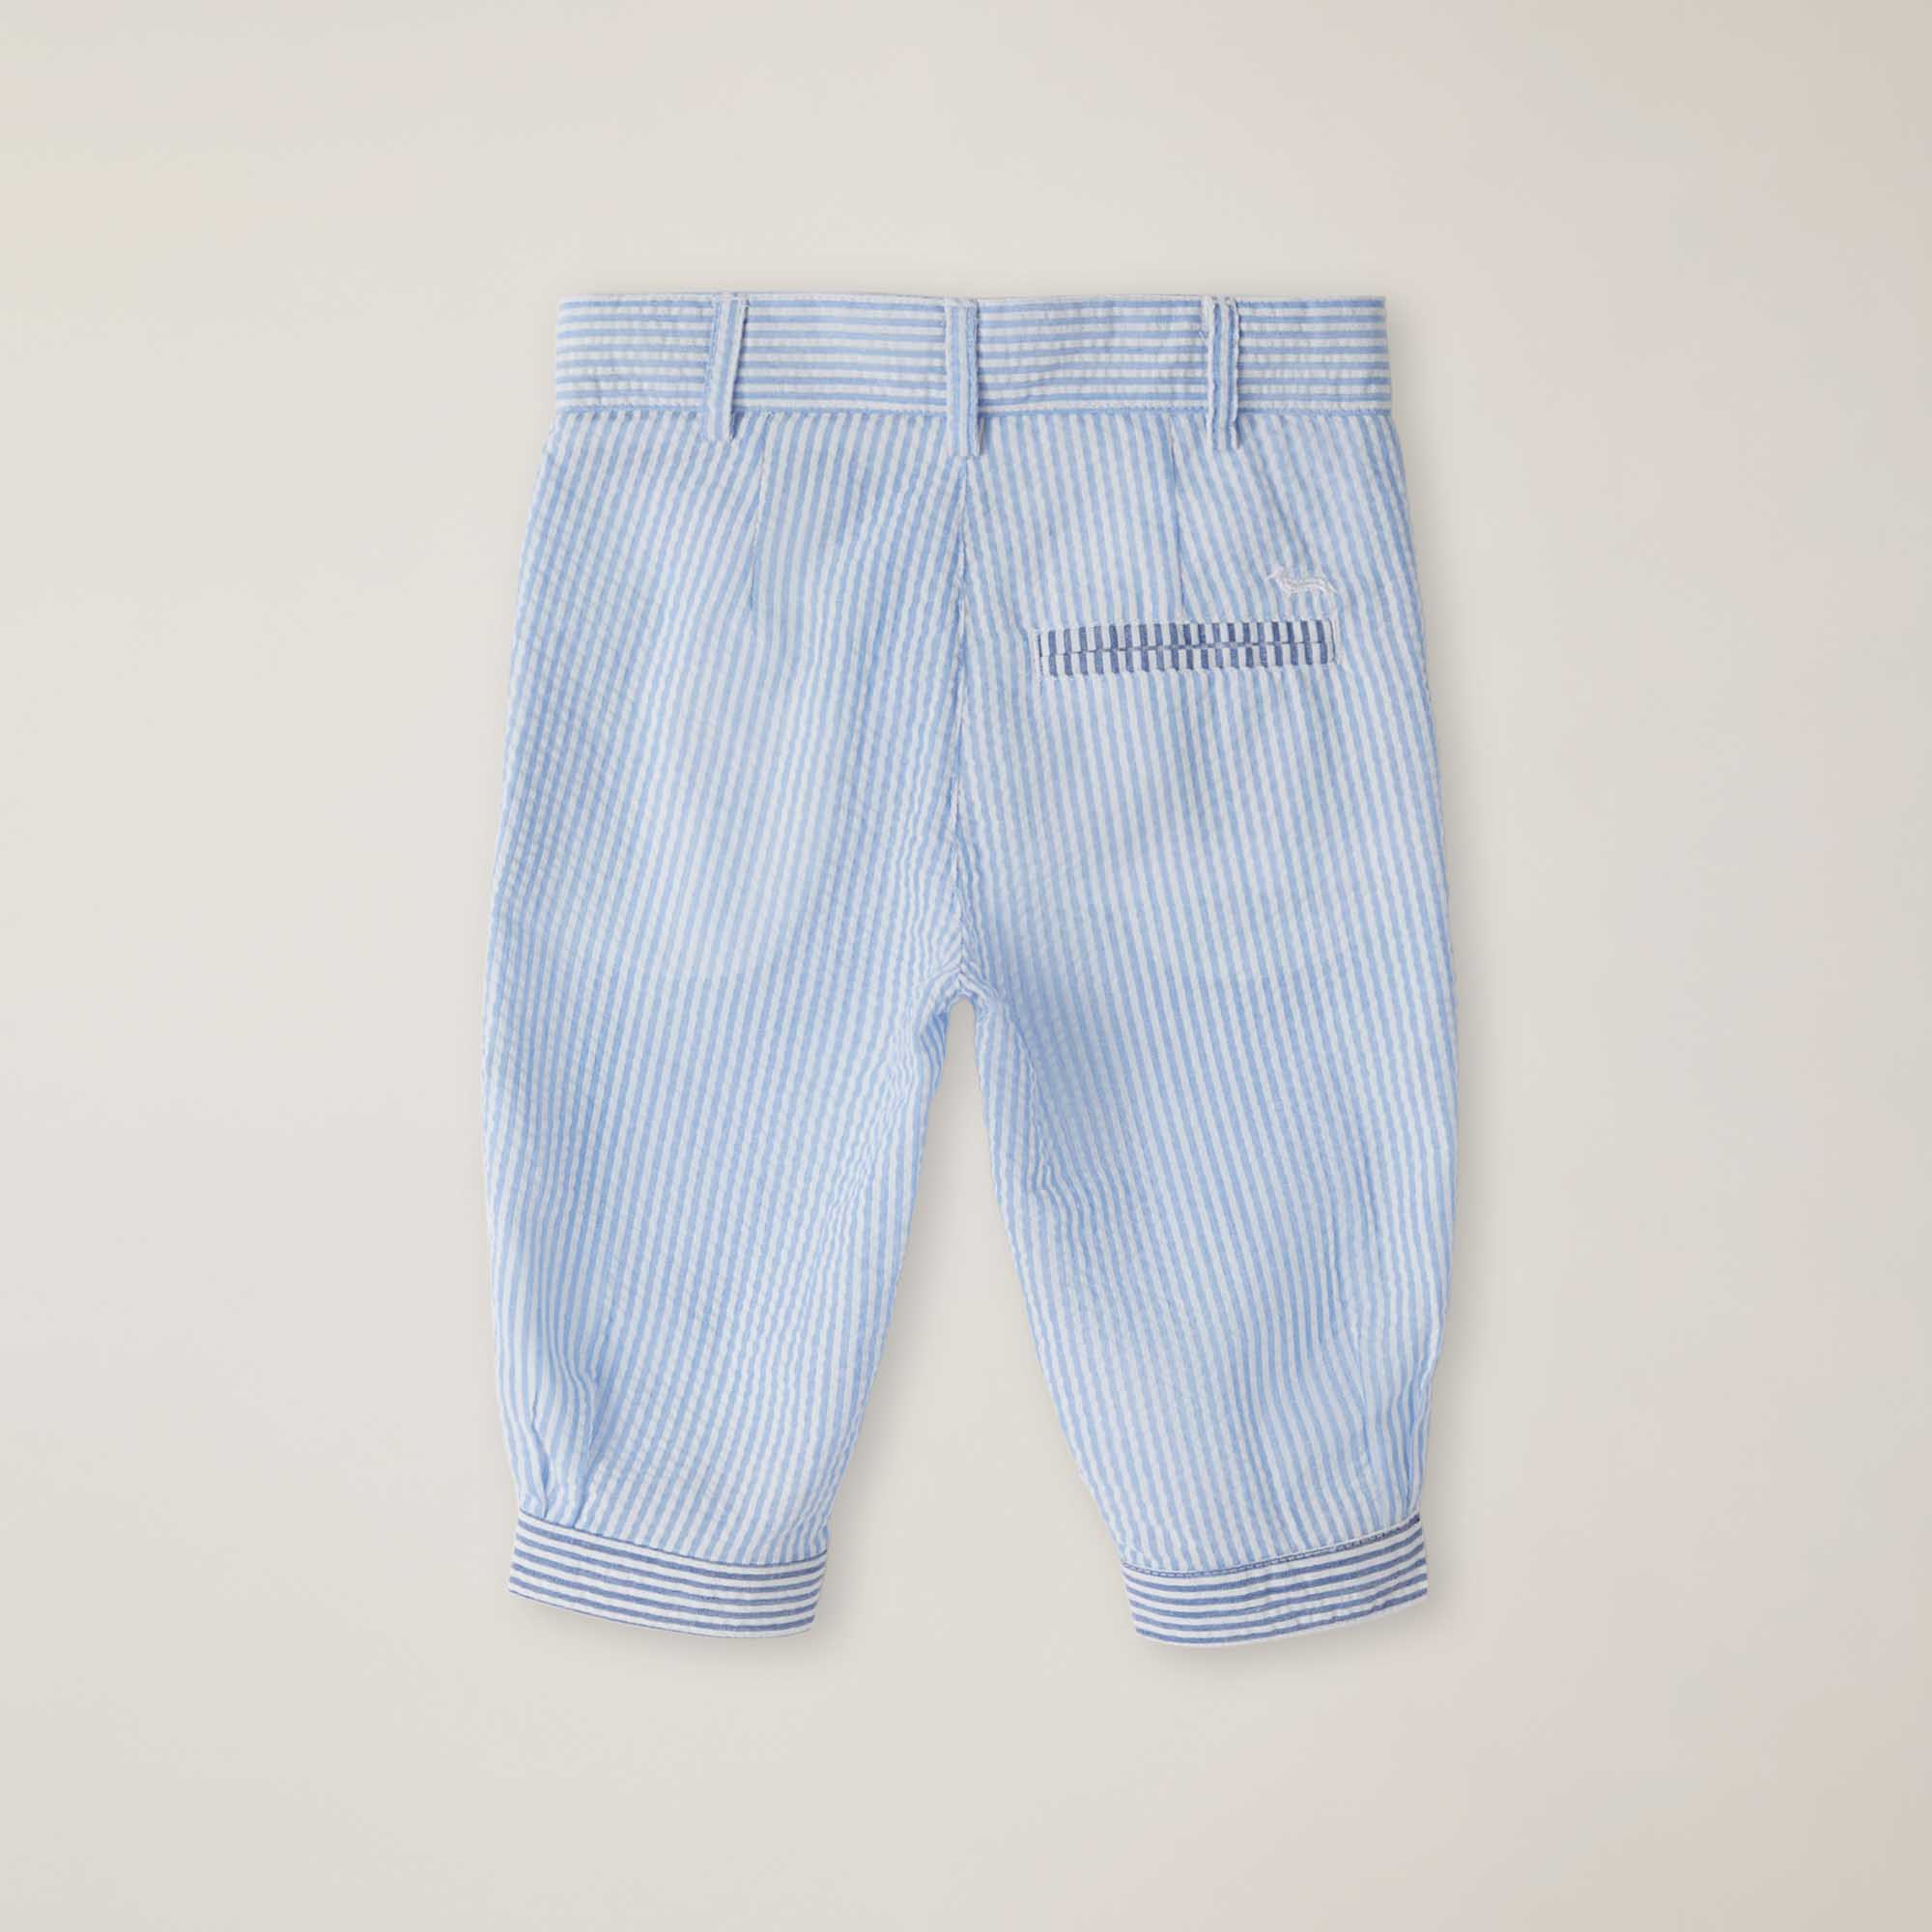 Seersucker Bermuda shorts with Dachshund embroidery, PALE SKY BLUE, large image number 1